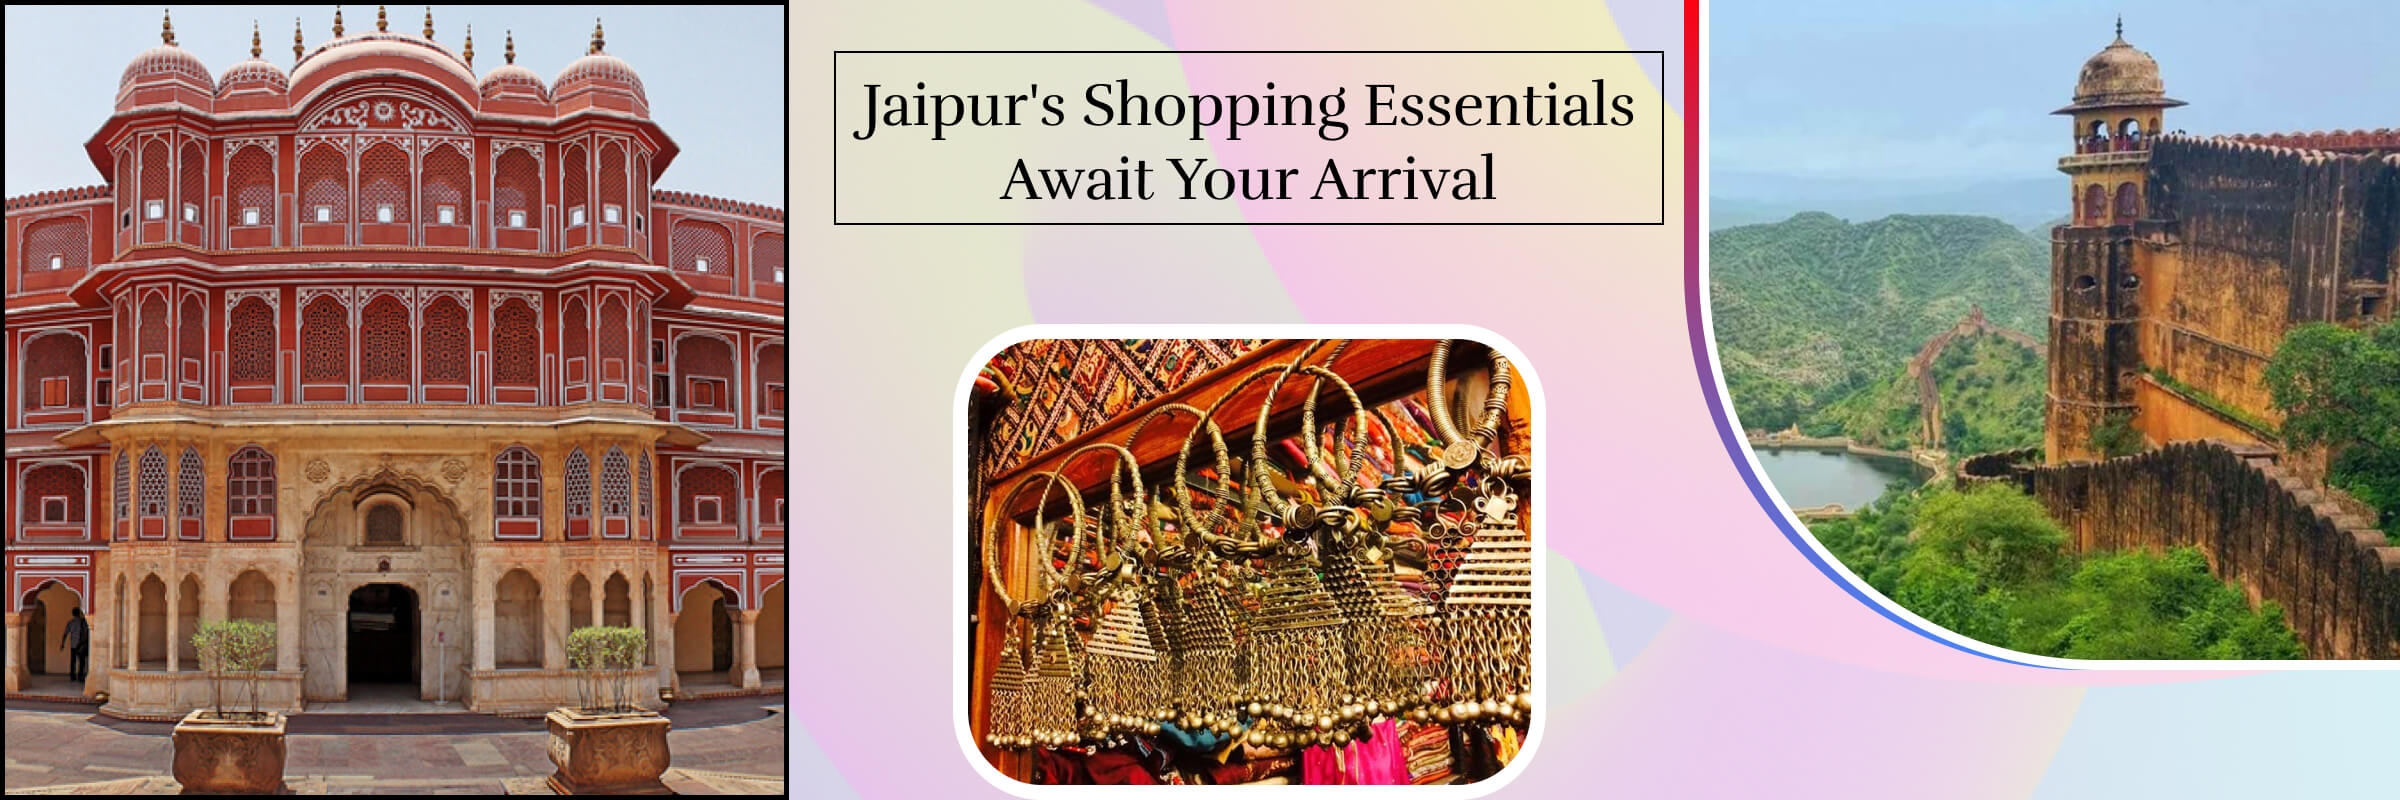 Don't Miss Out On These Must-Buy Items From Jaipur